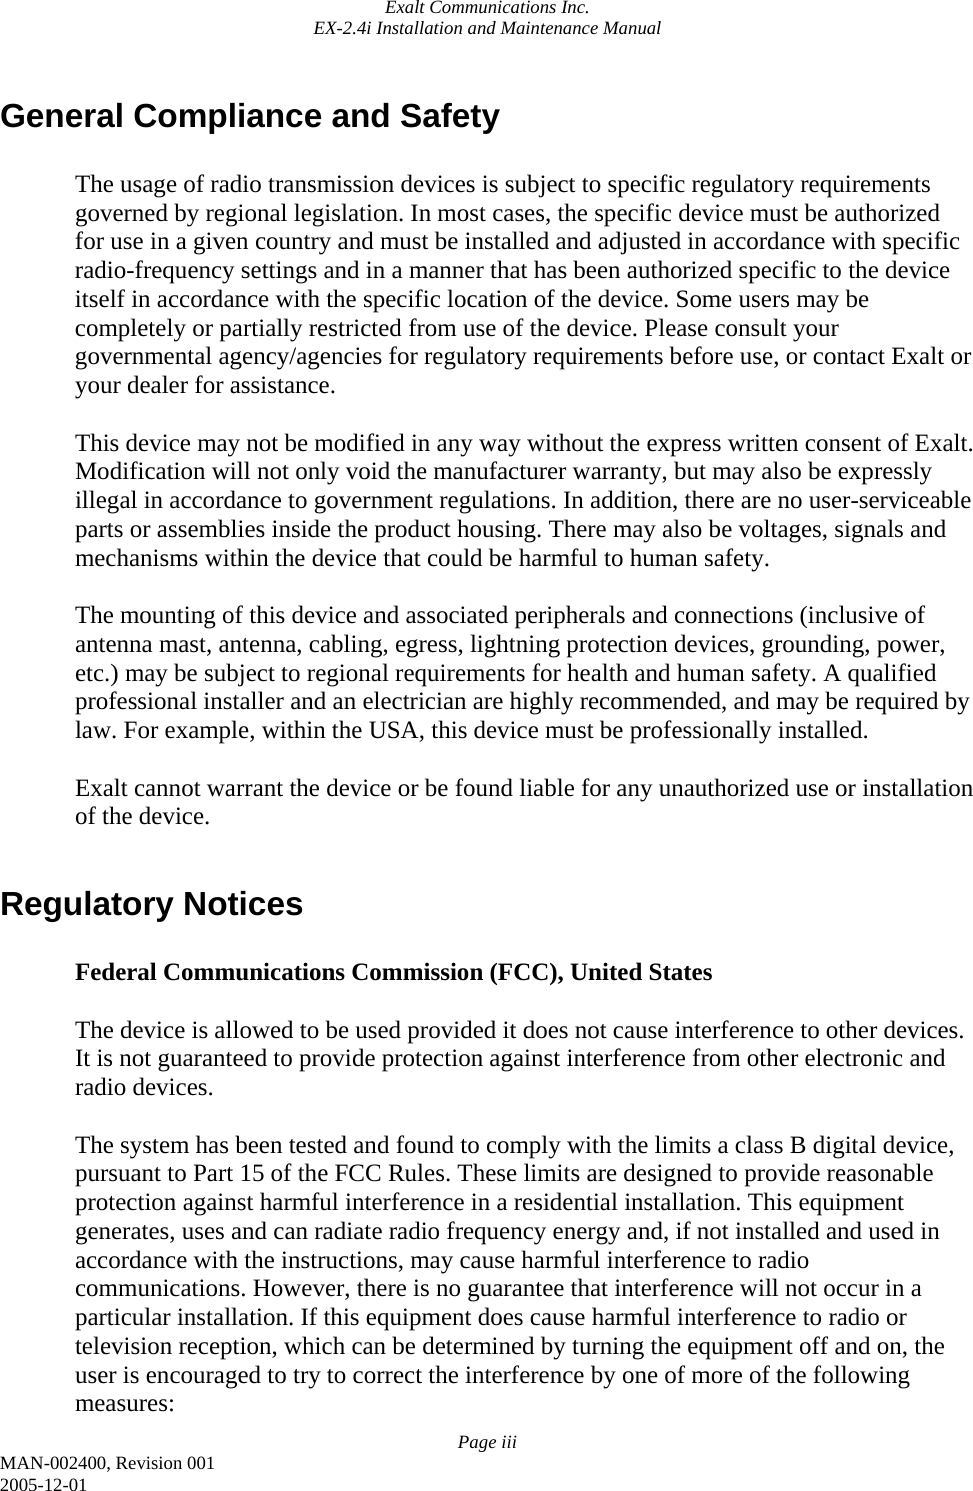 Exalt Communications Inc. EX-2.4i Installation and Maintenance Manual Page iii MAN-002400, Revision 001 2005-12-01 General Compliance and Safety  The usage of radio transmission devices is subject to specific regulatory requirements governed by regional legislation. In most cases, the specific device must be authorized for use in a given country and must be installed and adjusted in accordance with specific radio-frequency settings and in a manner that has been authorized specific to the device itself in accordance with the specific location of the device. Some users may be completely or partially restricted from use of the device. Please consult your governmental agency/agencies for regulatory requirements before use, or contact Exalt or your dealer for assistance.  This device may not be modified in any way without the express written consent of Exalt. Modification will not only void the manufacturer warranty, but may also be expressly illegal in accordance to government regulations. In addition, there are no user-serviceable parts or assemblies inside the product housing. There may also be voltages, signals and mechanisms within the device that could be harmful to human safety.  The mounting of this device and associated peripherals and connections (inclusive of antenna mast, antenna, cabling, egress, lightning protection devices, grounding, power, etc.) may be subject to regional requirements for health and human safety. A qualified professional installer and an electrician are highly recommended, and may be required by law. For example, within the USA, this device must be professionally installed.  Exalt cannot warrant the device or be found liable for any unauthorized use or installation of the device.  Regulatory Notices  Federal Communications Commission (FCC), United States  The device is allowed to be used provided it does not cause interference to other devices. It is not guaranteed to provide protection against interference from other electronic and radio devices.  The system has been tested and found to comply with the limits a class B digital device, pursuant to Part 15 of the FCC Rules. These limits are designed to provide reasonable protection against harmful interference in a residential installation. This equipment generates, uses and can radiate radio frequency energy and, if not installed and used in accordance with the instructions, may cause harmful interference to radio communications. However, there is no guarantee that interference will not occur in a particular installation. If this equipment does cause harmful interference to radio or television reception, which can be determined by turning the equipment off and on, the user is encouraged to try to correct the interference by one of more of the following measures: 